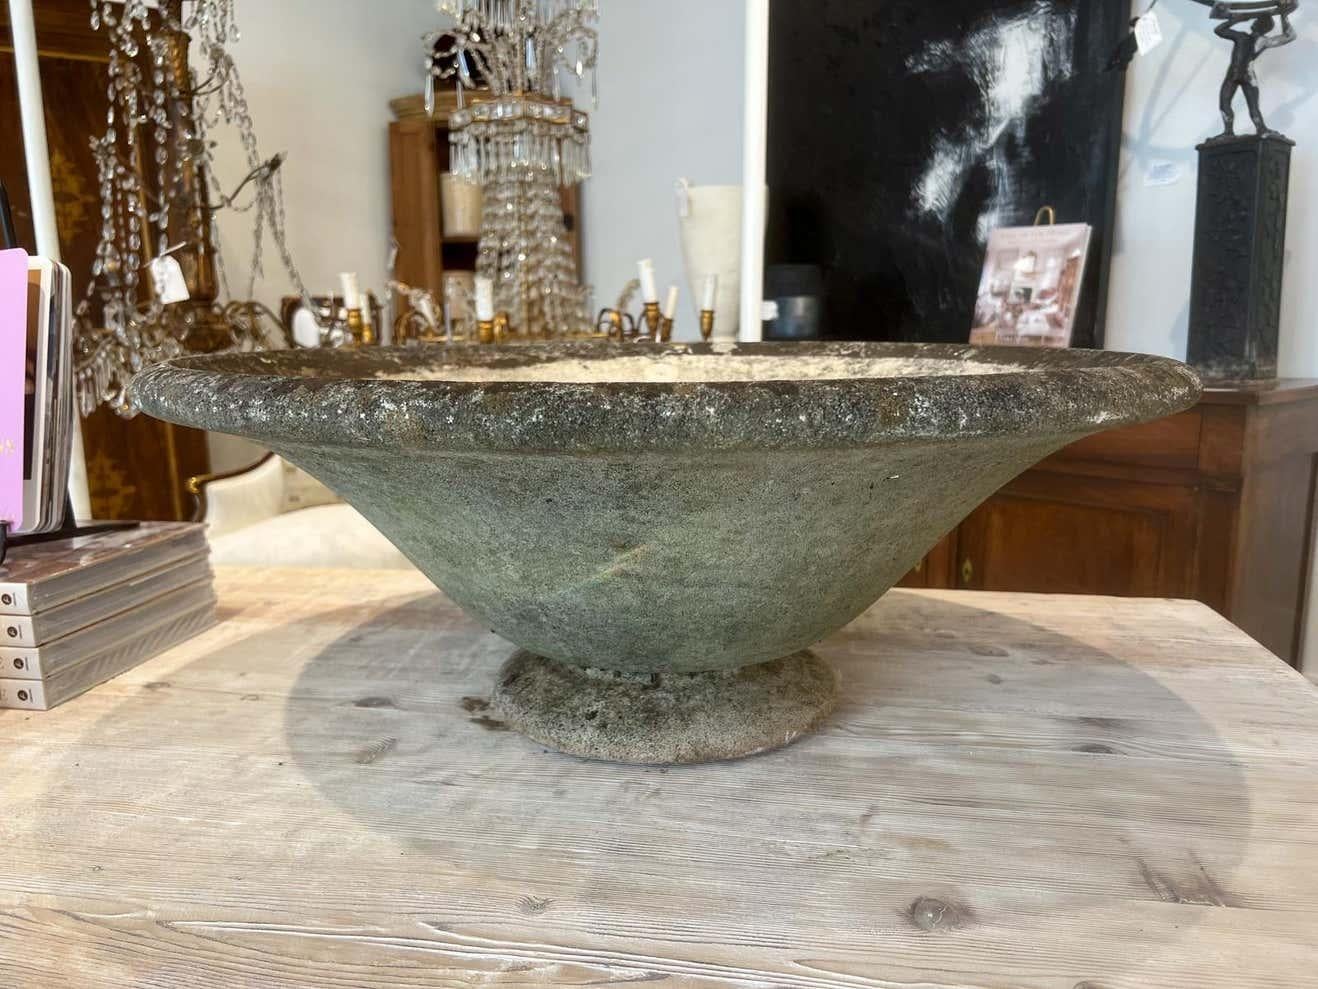 Large indoor or outdoor planter with midcentury aesthetic.